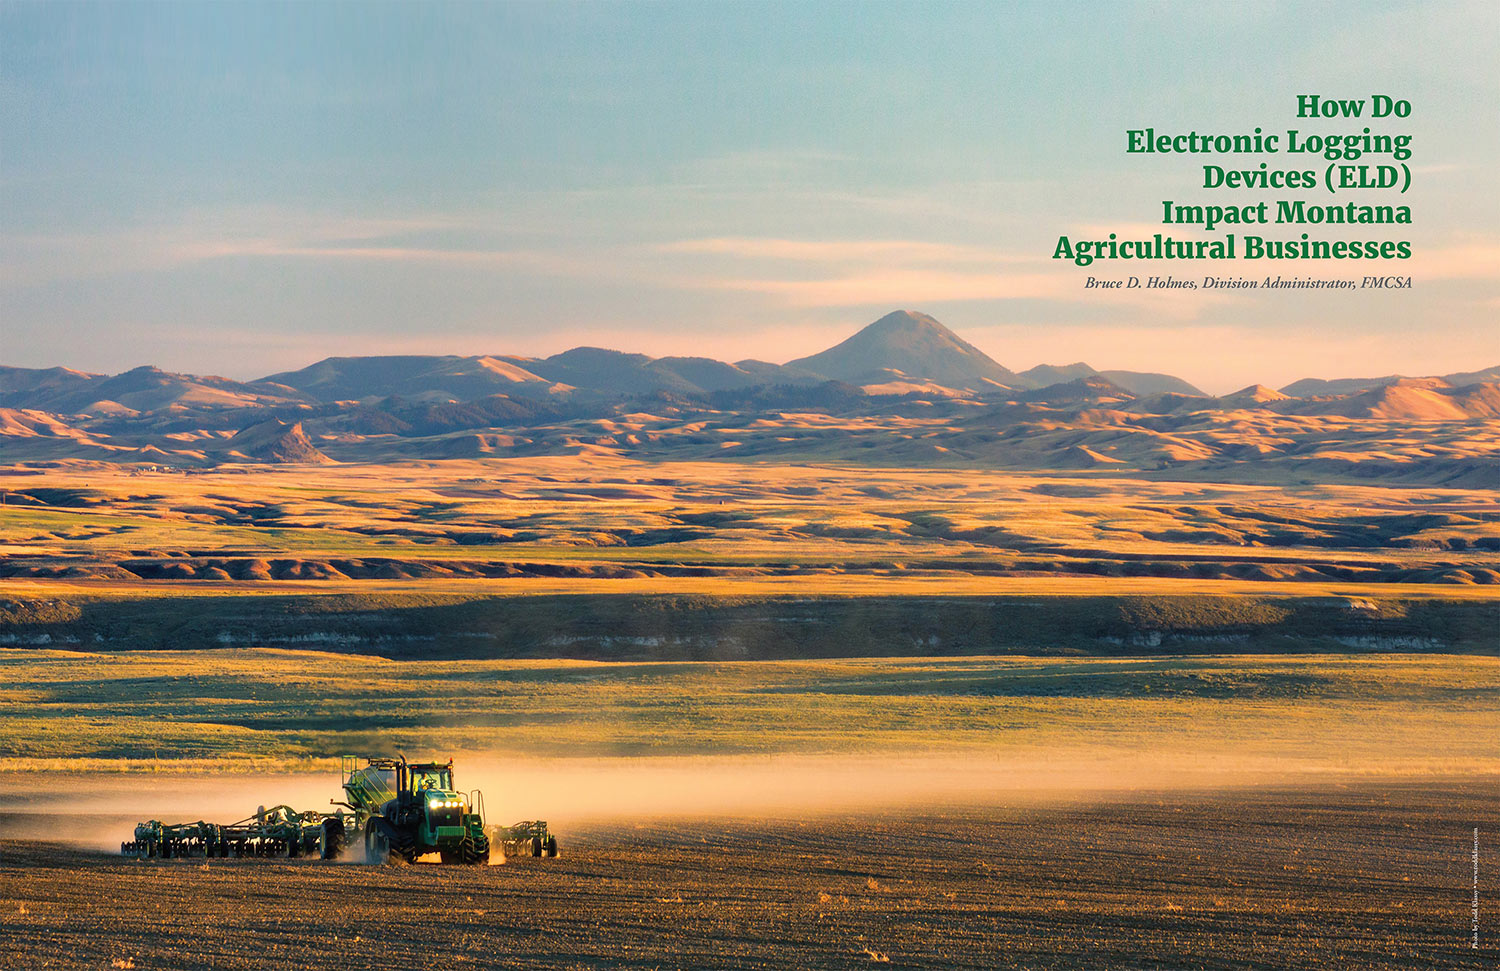 Two-page photo spread published in Growing Montana magazine